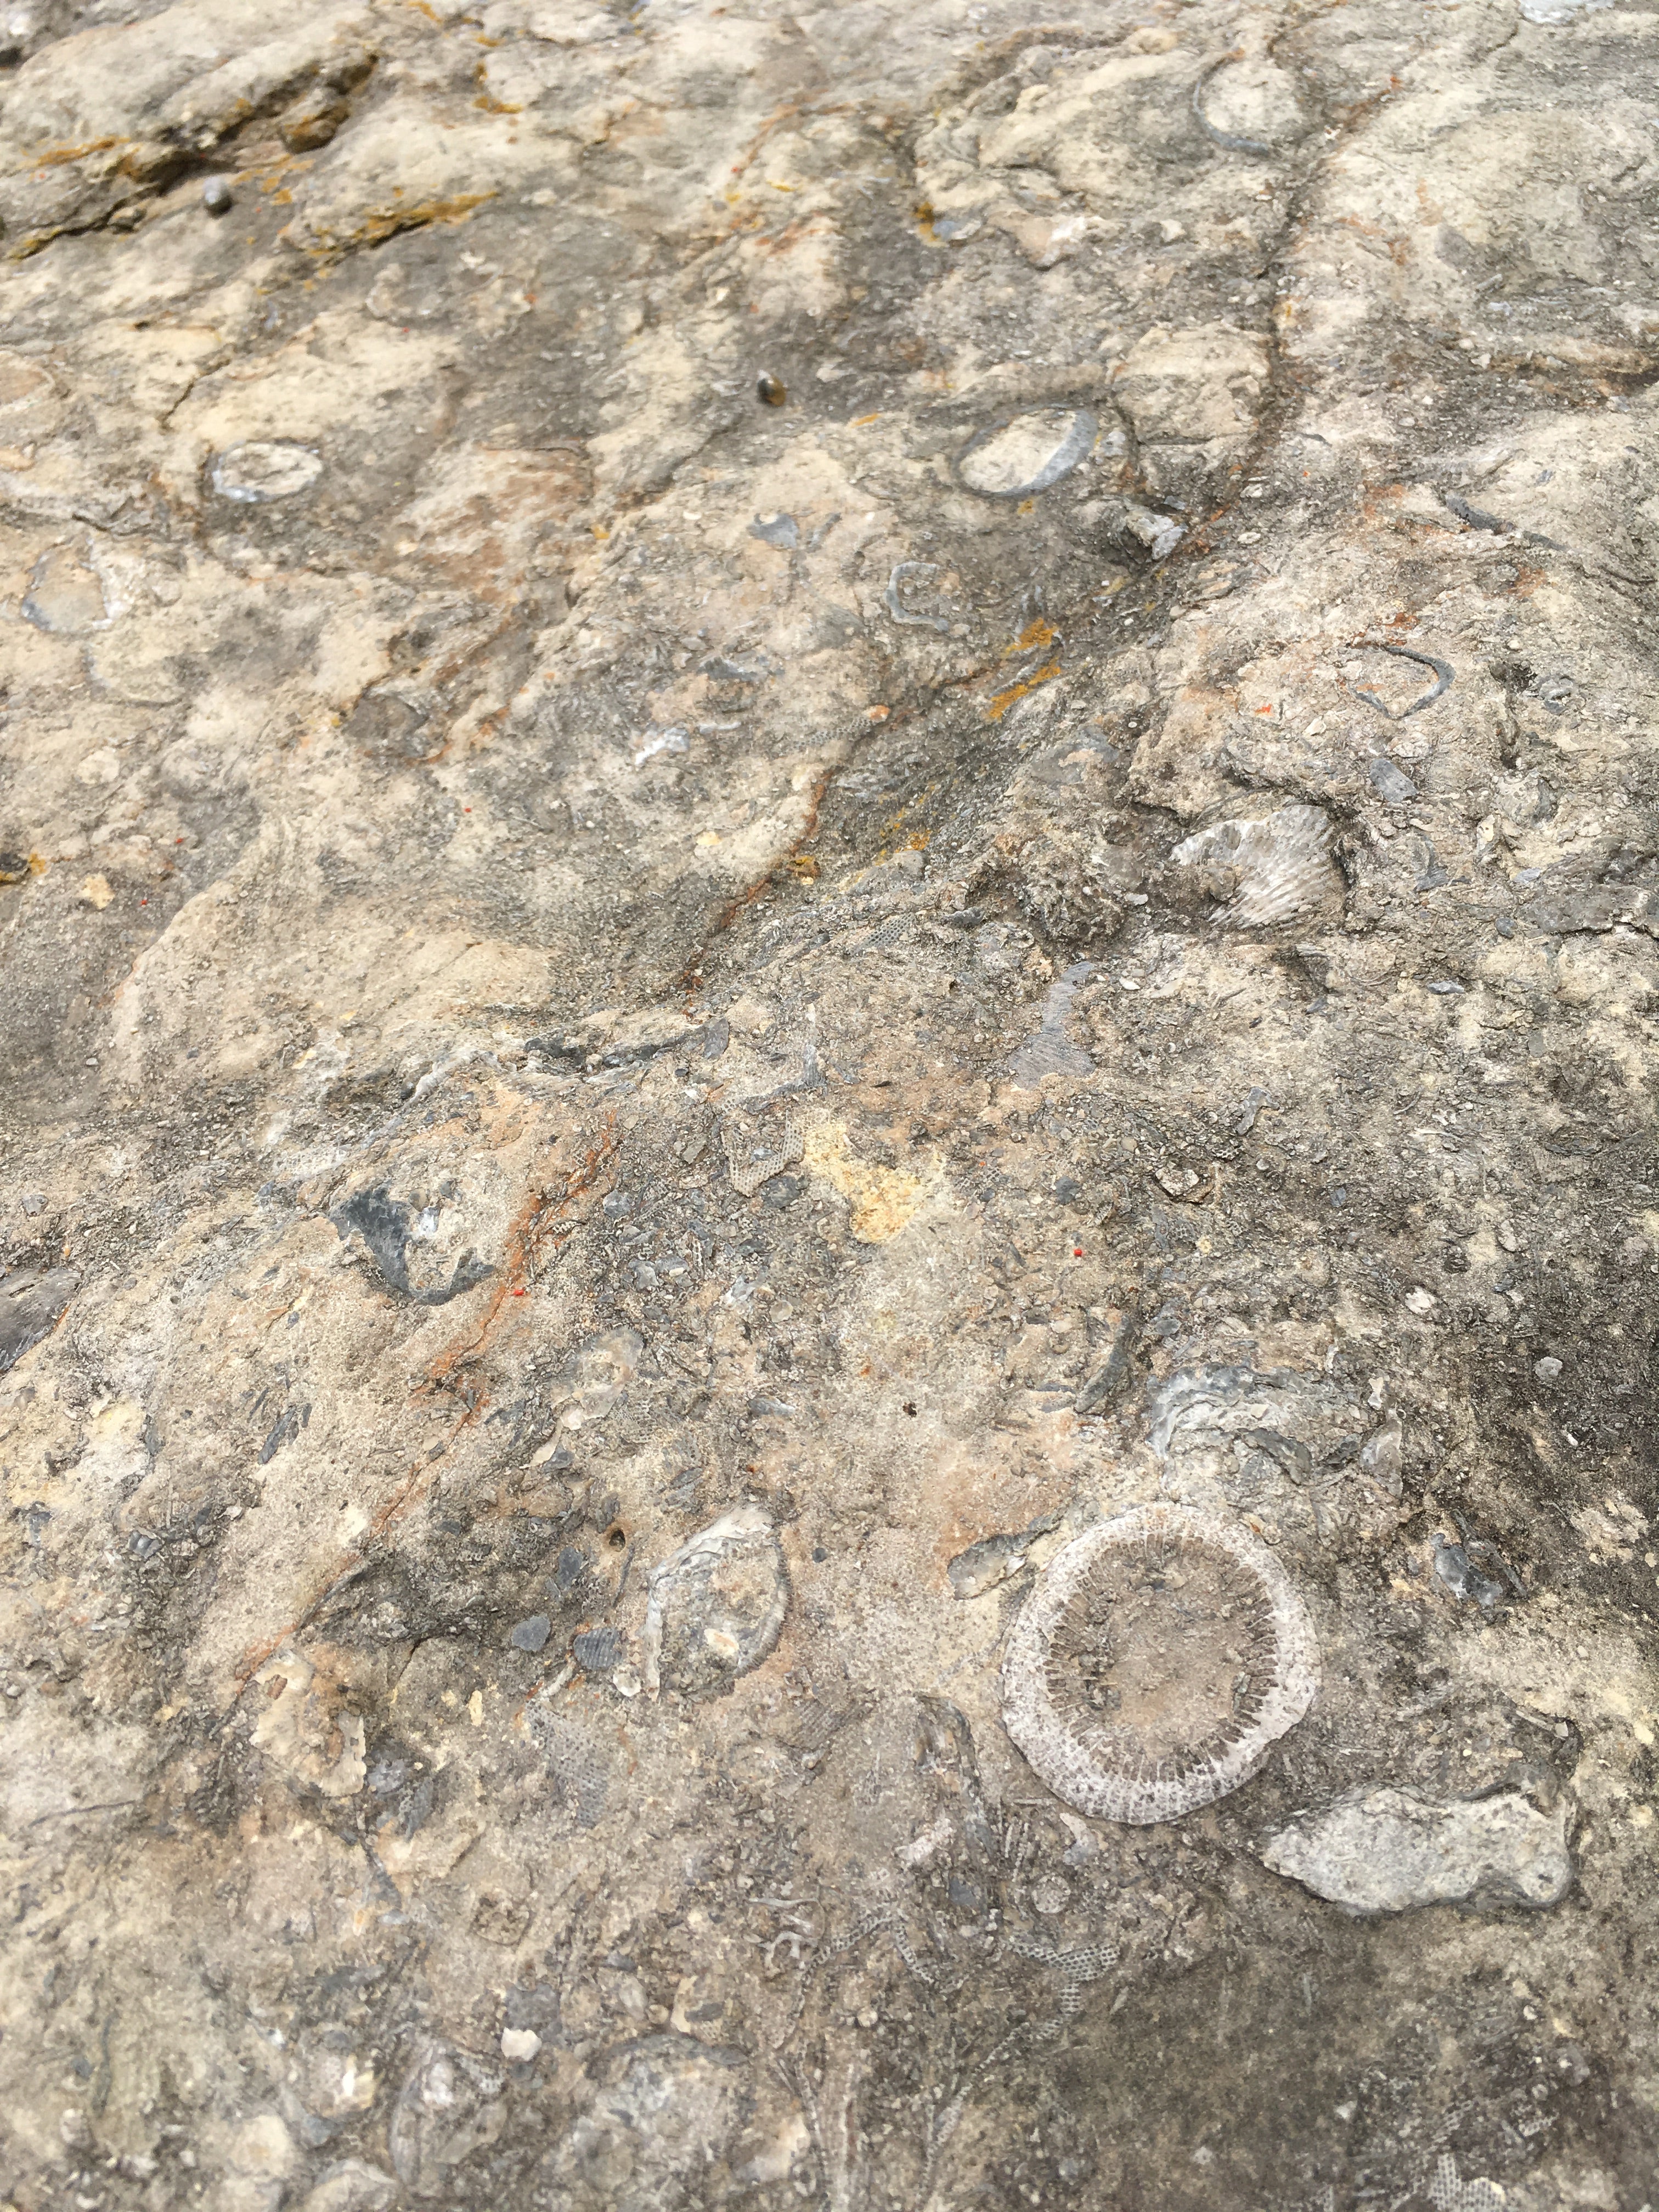 Tons of easy to see fossils